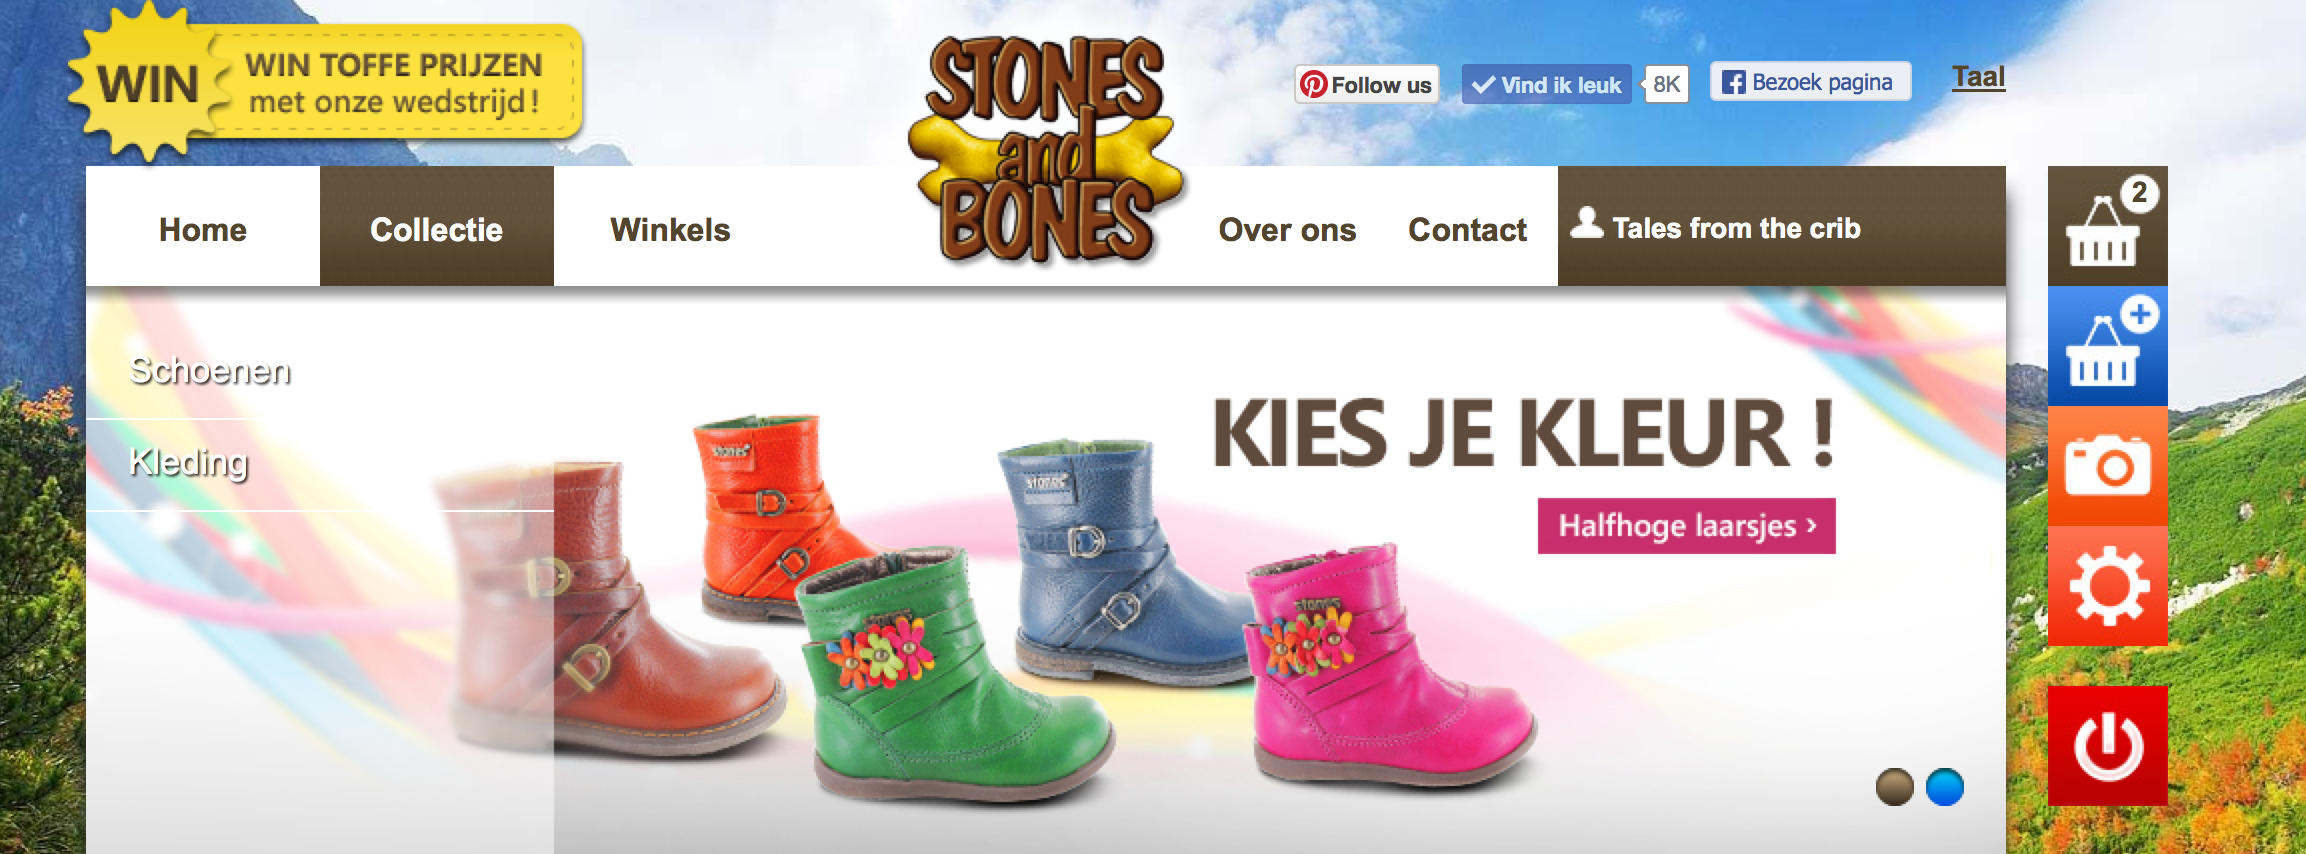 lilith reviewt schoenen van Stones and Bones | Tales from the